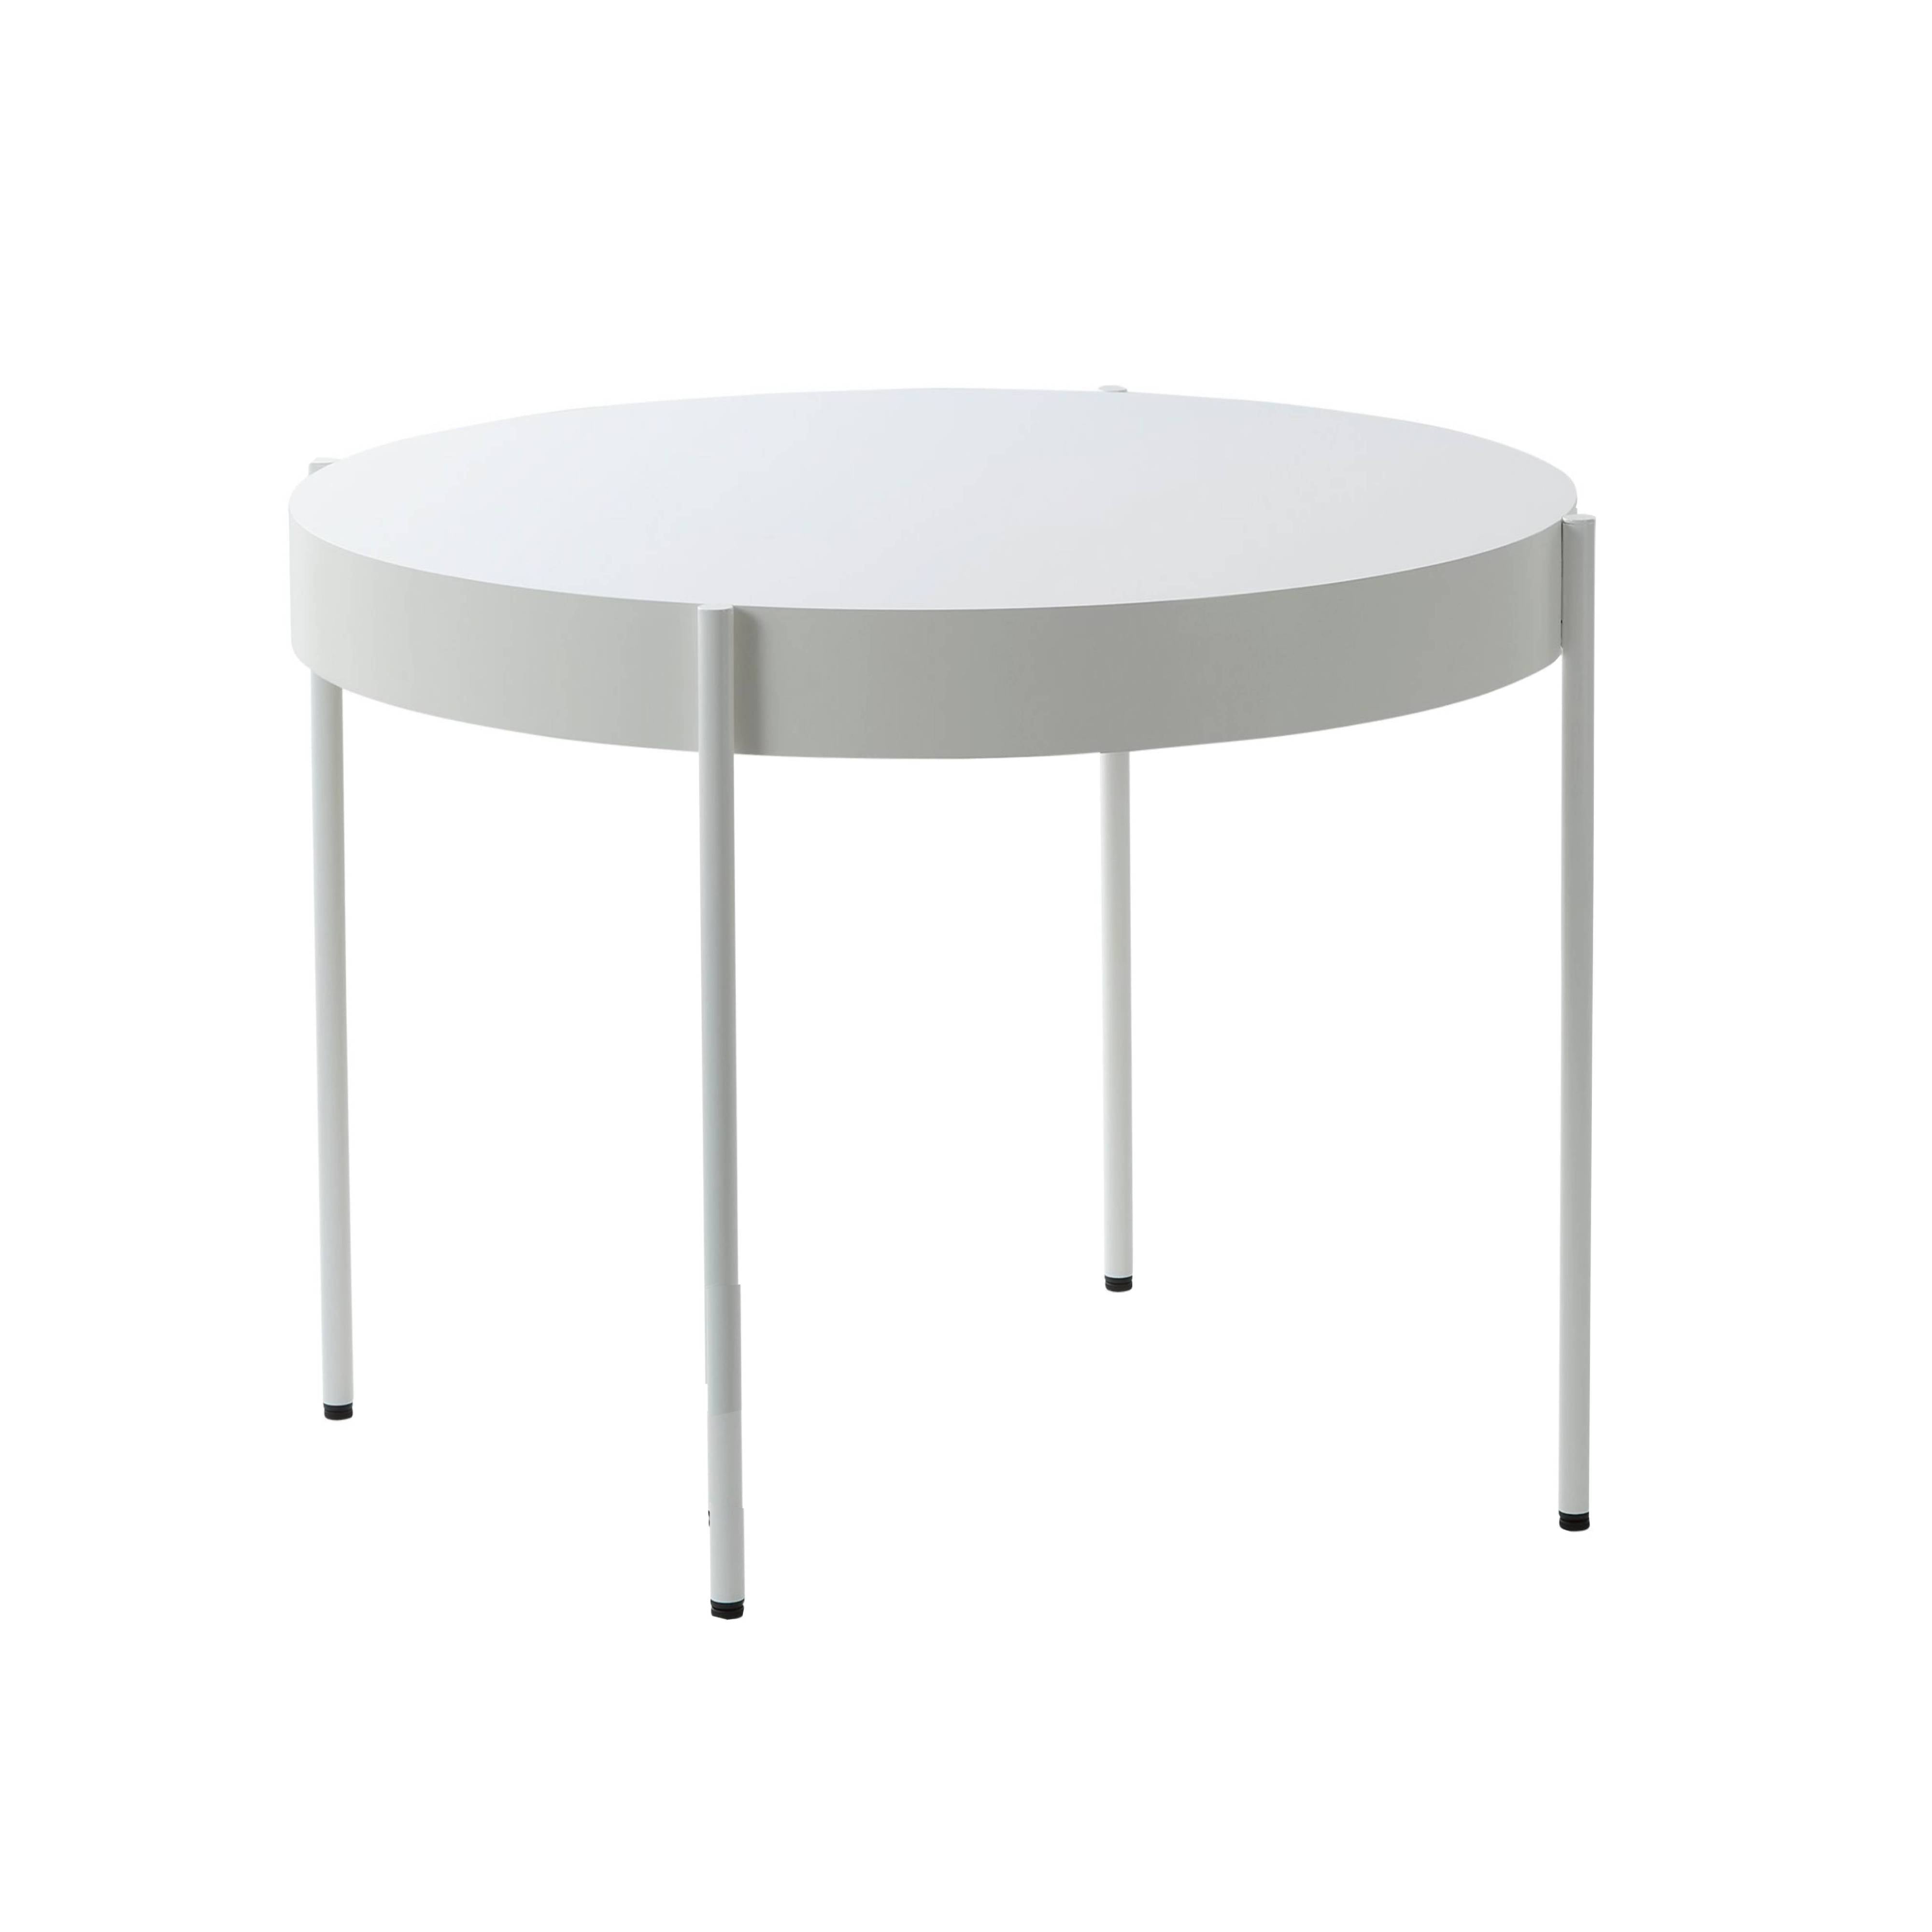 Series 430 Table: Small - 47.2